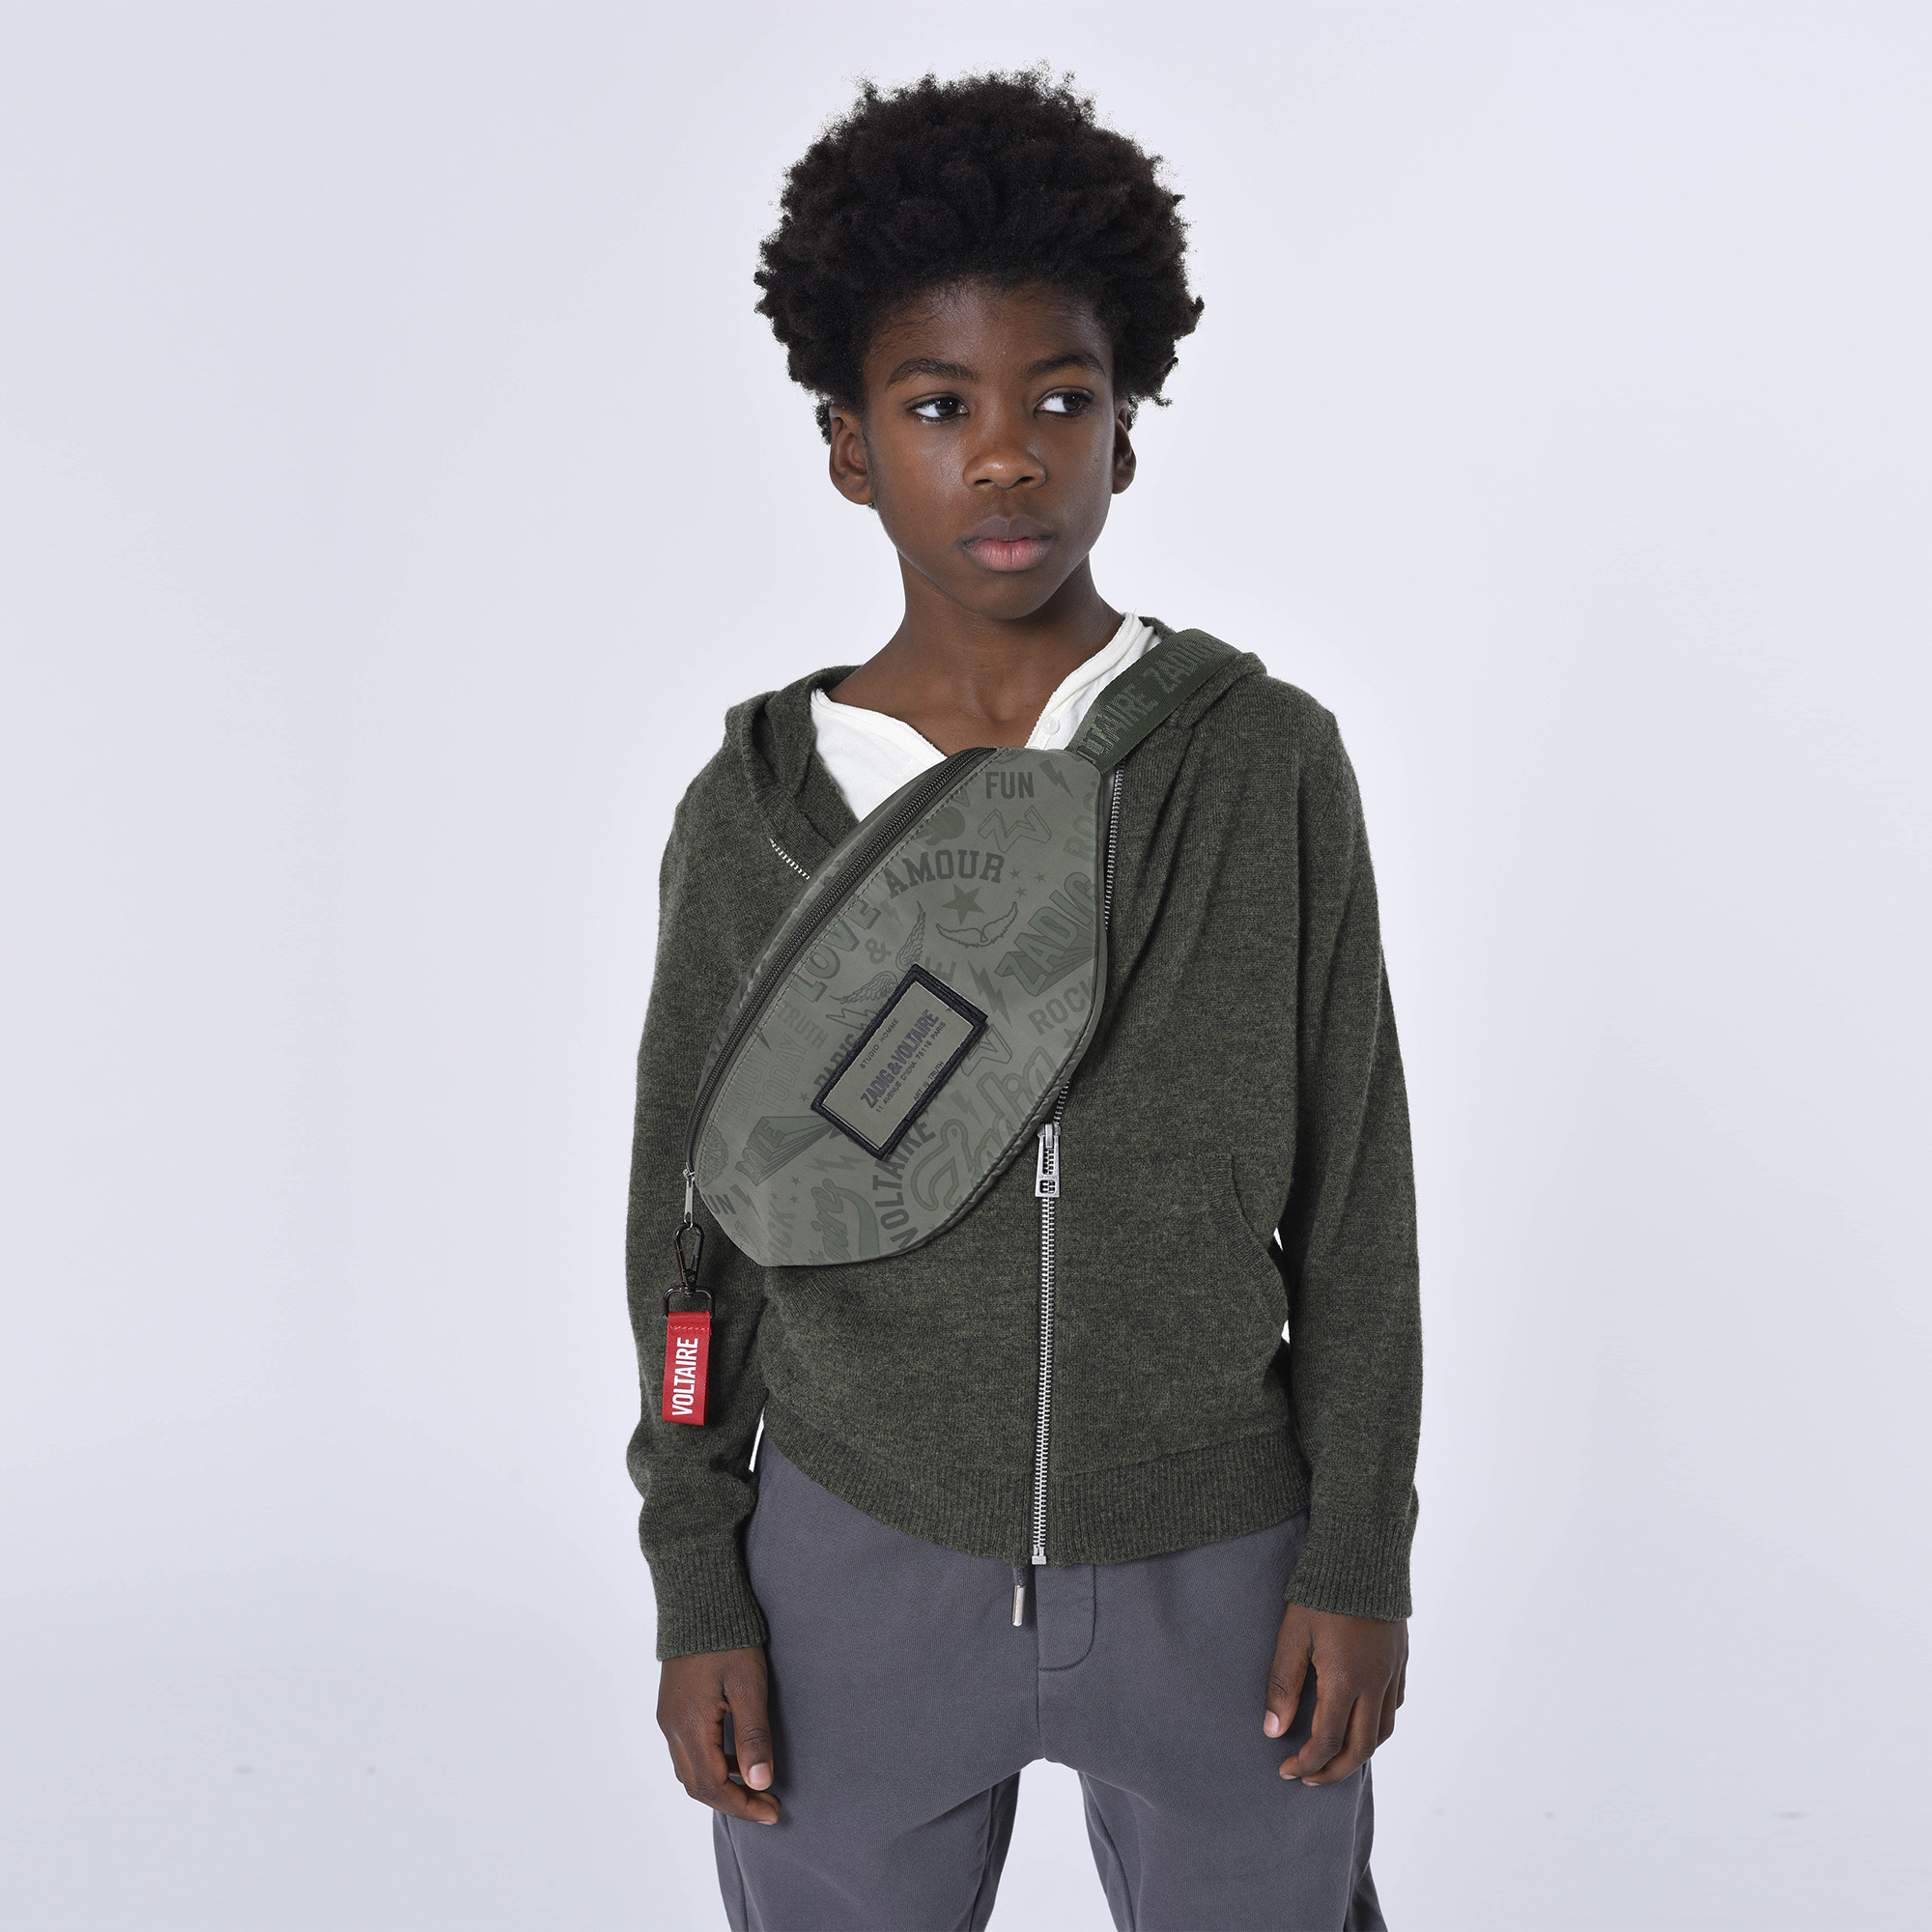 Hooded cardigan ZADIG & VOLTAIRE for BOY